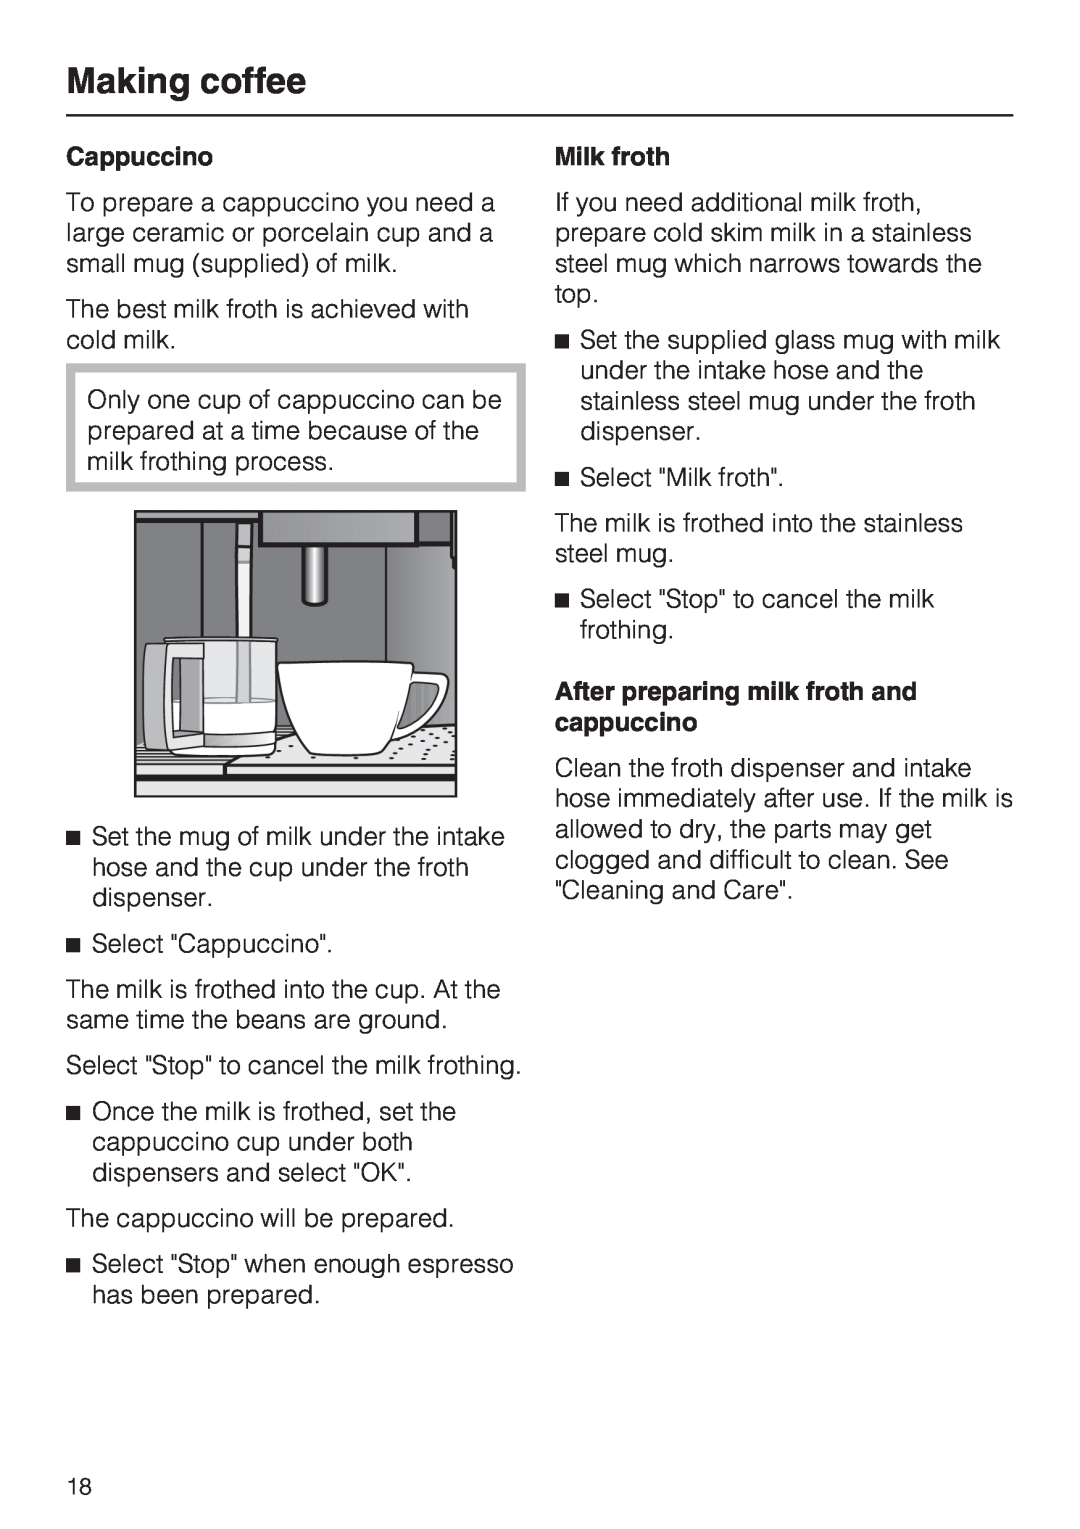 Miele CVA4075 installation instructions Cappuccino, Milk froth, After preparing milk froth and, cappuccino, Making coffee 